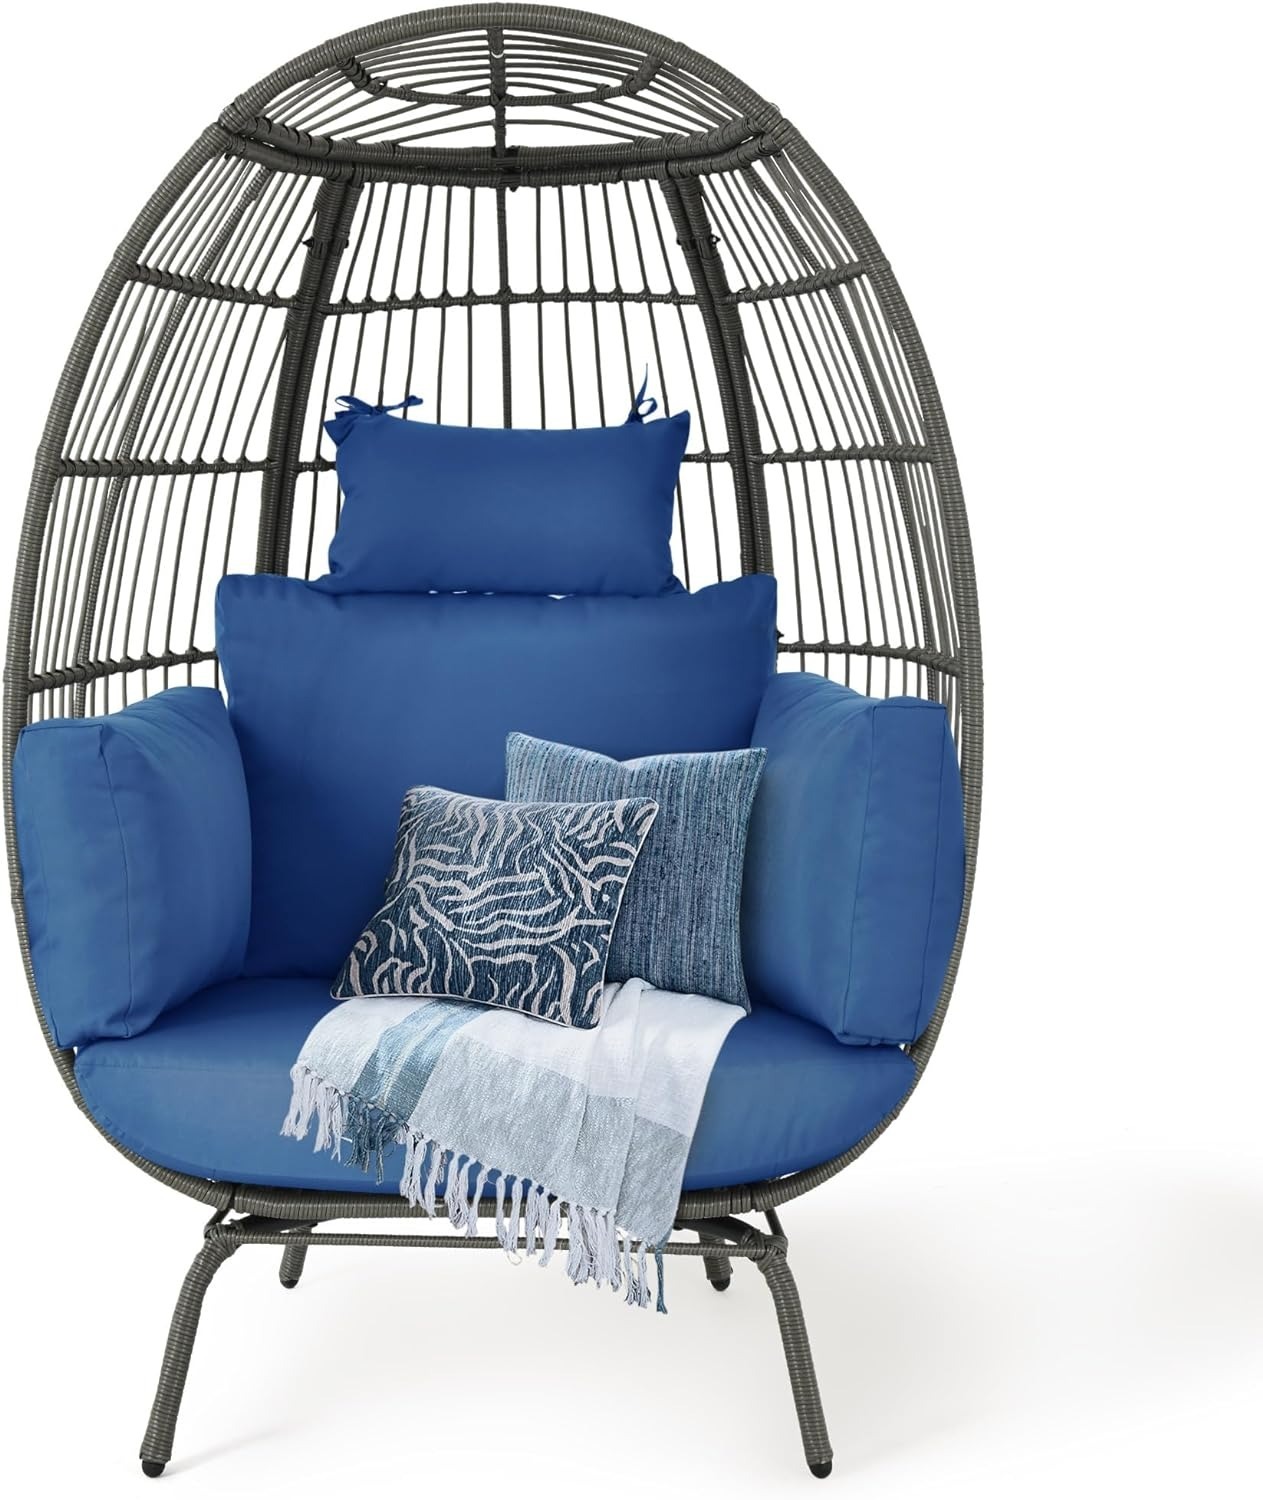 YITAHOME Oversized Wicker Indoor/Outdoor Egg Chair $159.59 + Free Shipping